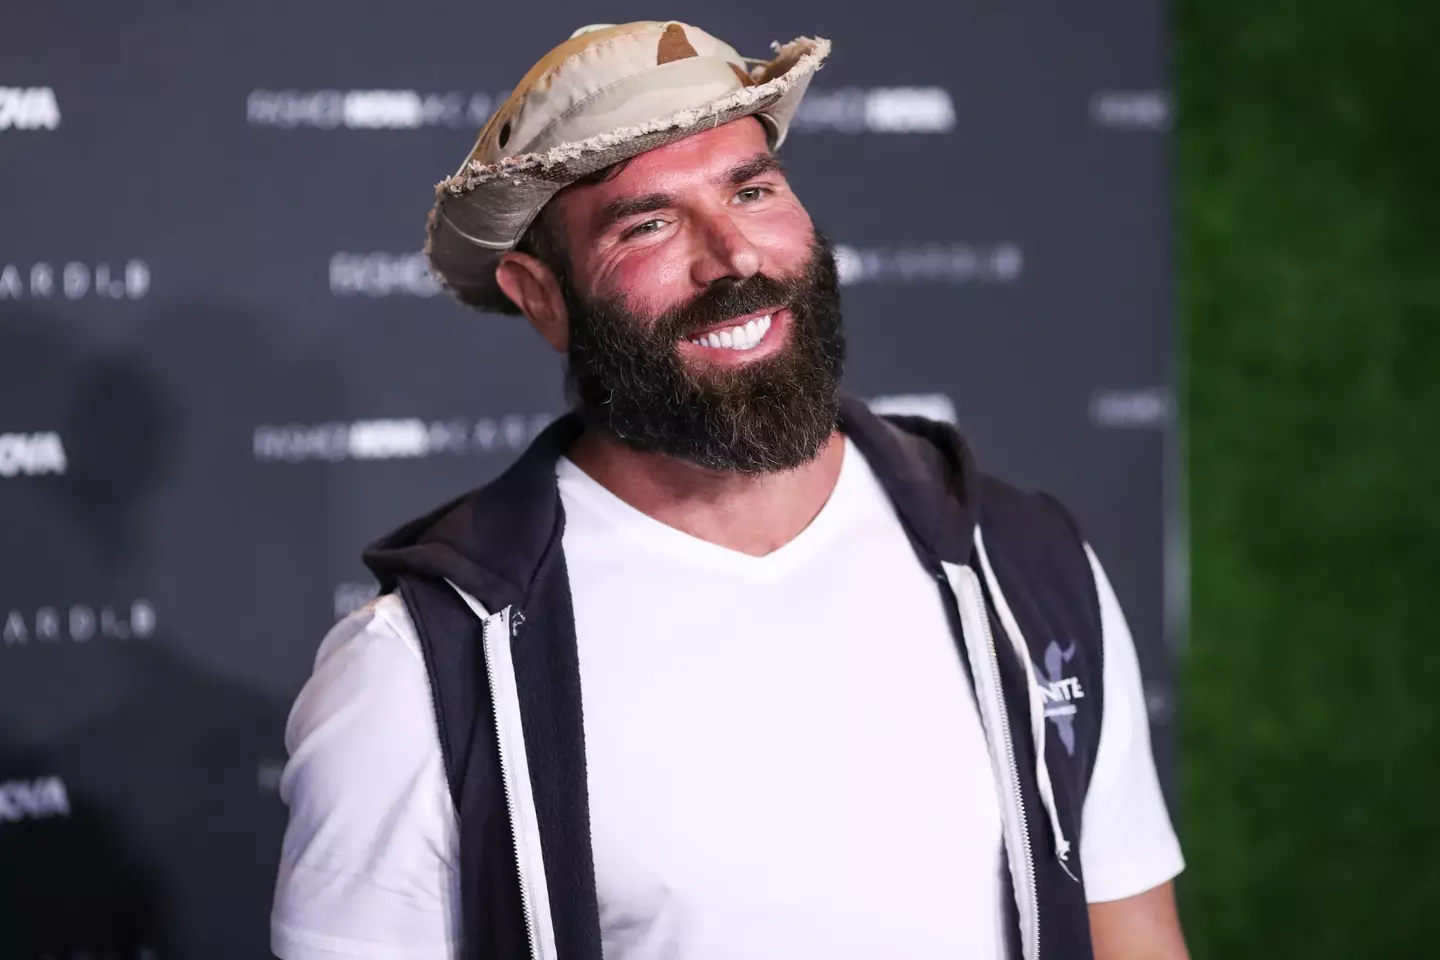 Dan Bilzerian has teased fans with his latest Instagram picture by suggesting he may have gotten married.